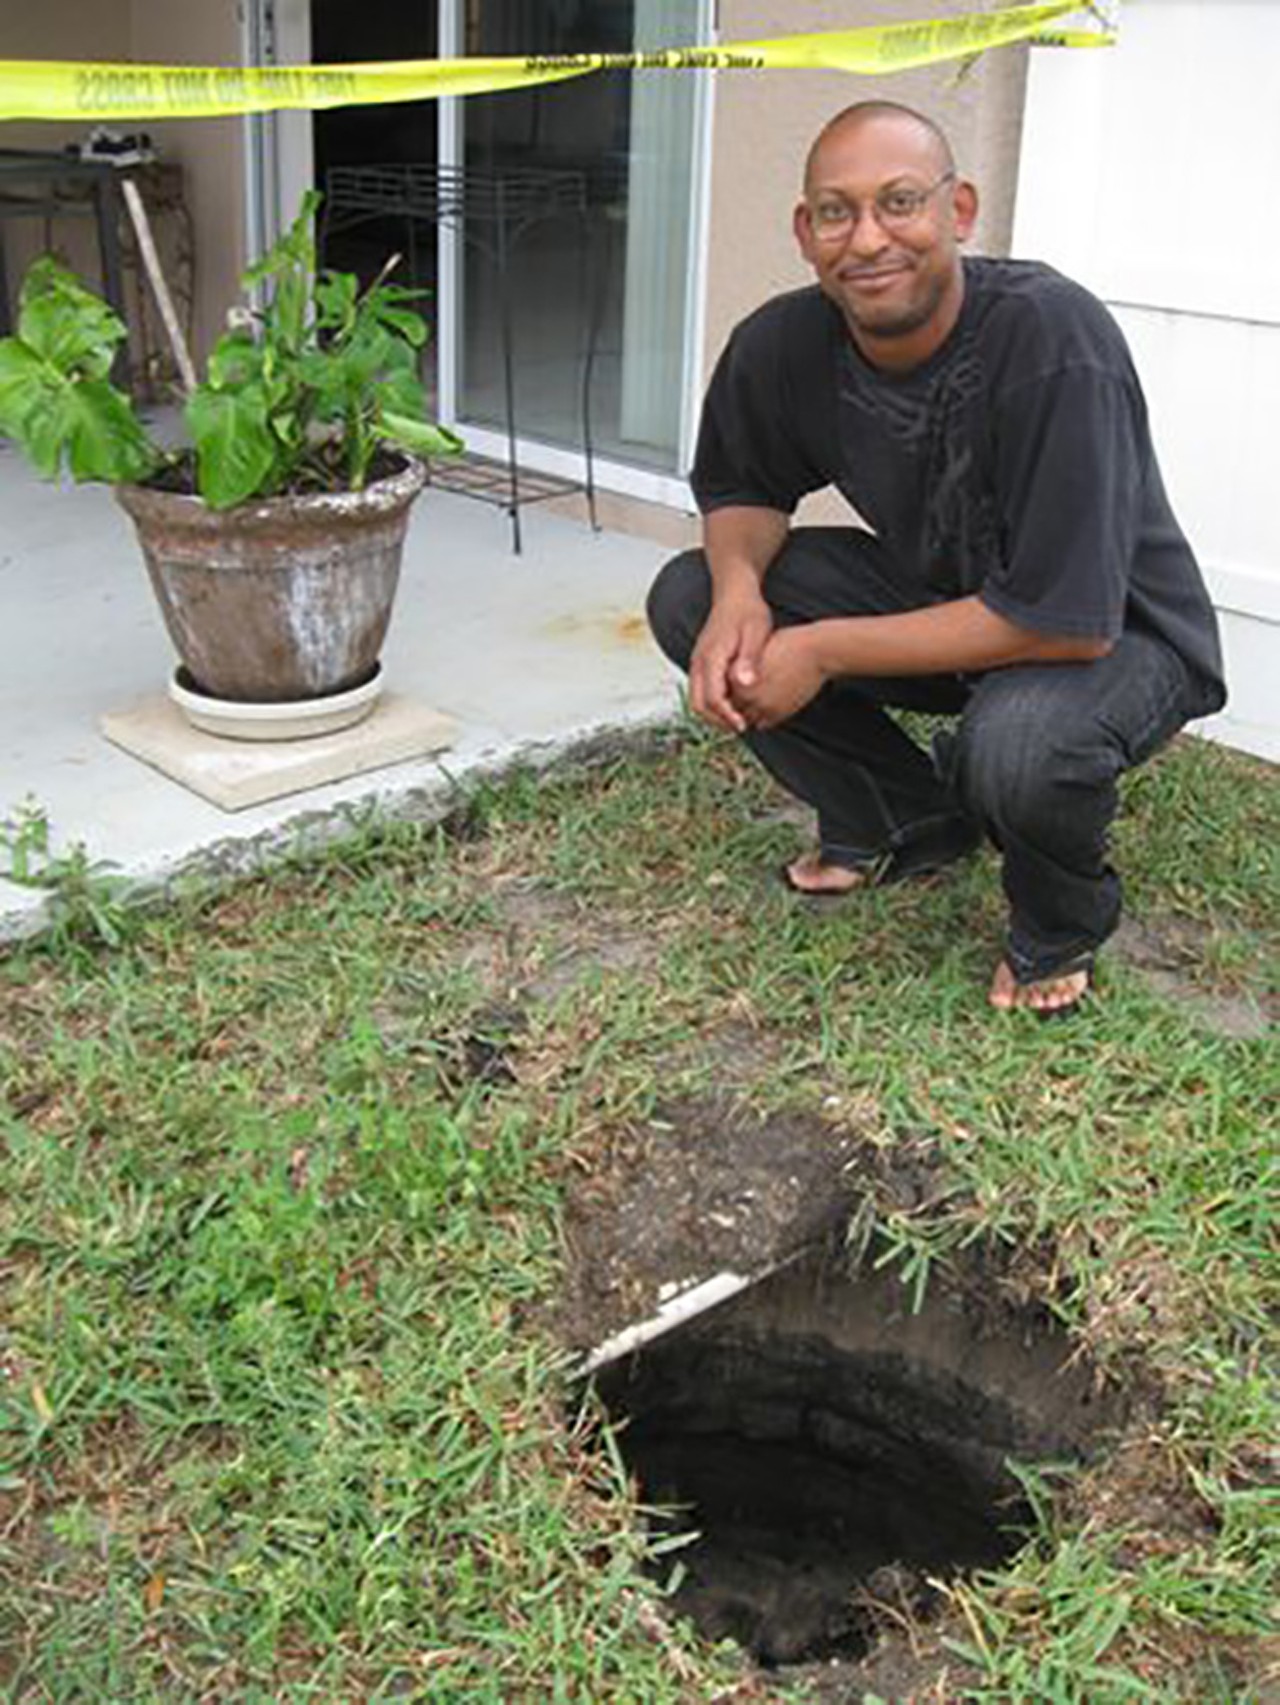 Woman trapped in backyard sinkhole twice
March 29, 2011
Carla Chapman of Plant City, Fla. was trapped inside a sinkhole in her backyard for two hours until a neighbor came to the rescue. Then, a year later, another narrow sinkhole opened up in her backyard that gobbled her up. Chapman called her husband who then contacted emergency services. Police and firefighters managed to drag her out of the hole. We don't blame her if she never wants to go back out there.
Photo via tampabay.com